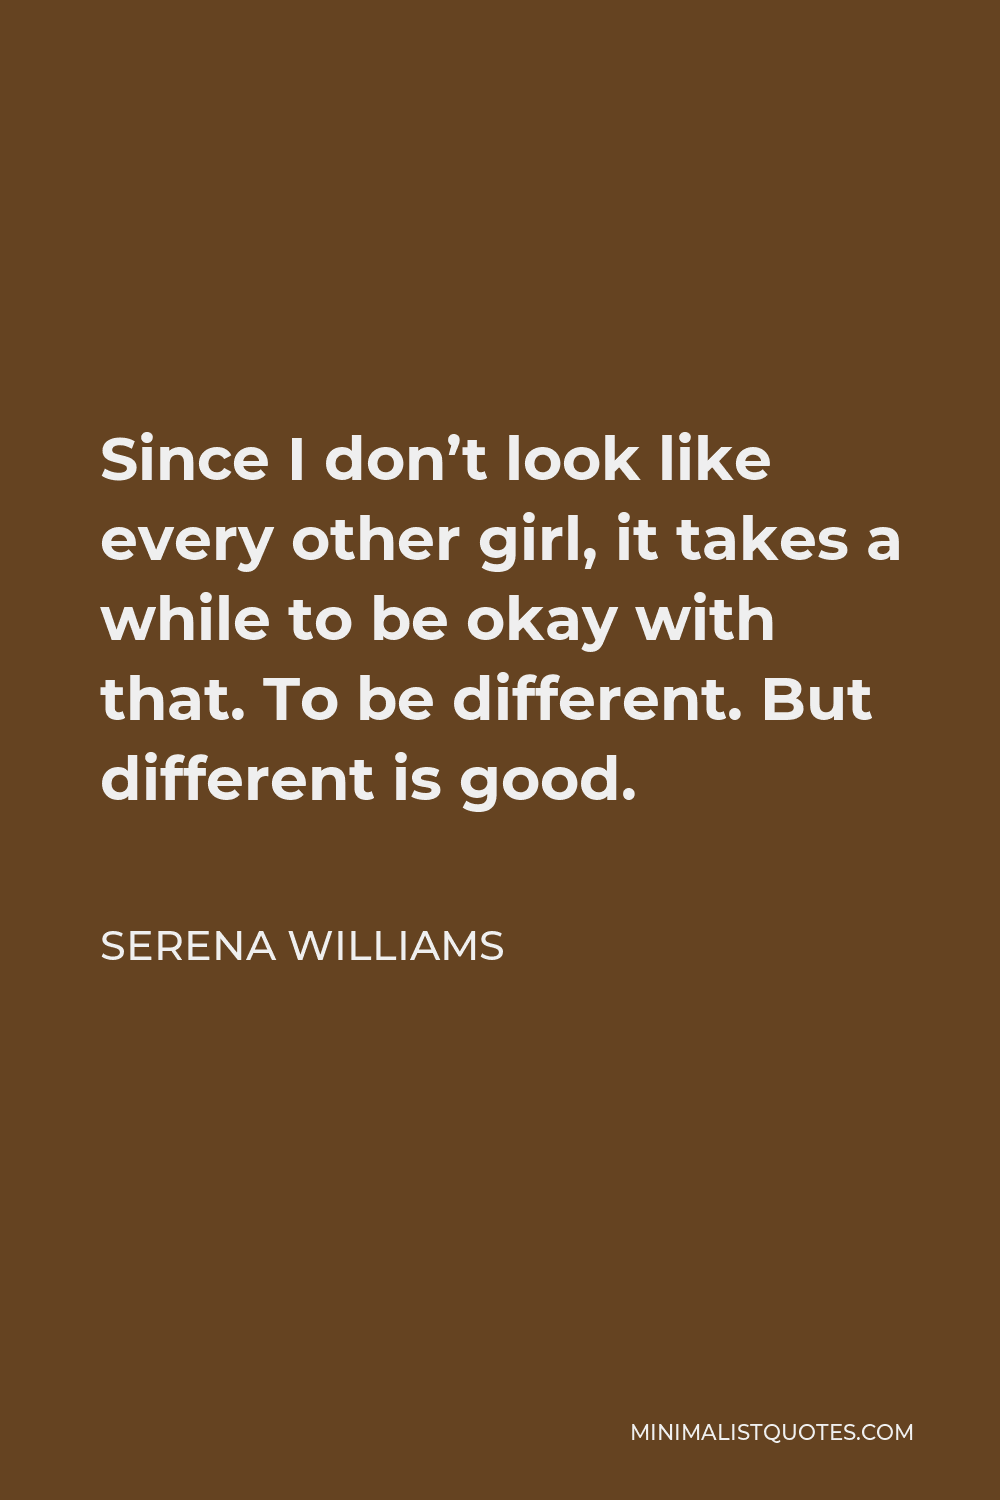 Serena Williams Quote - Since I don’t look like every other girl, it takes a while to be okay with that. To be different. But different is good.